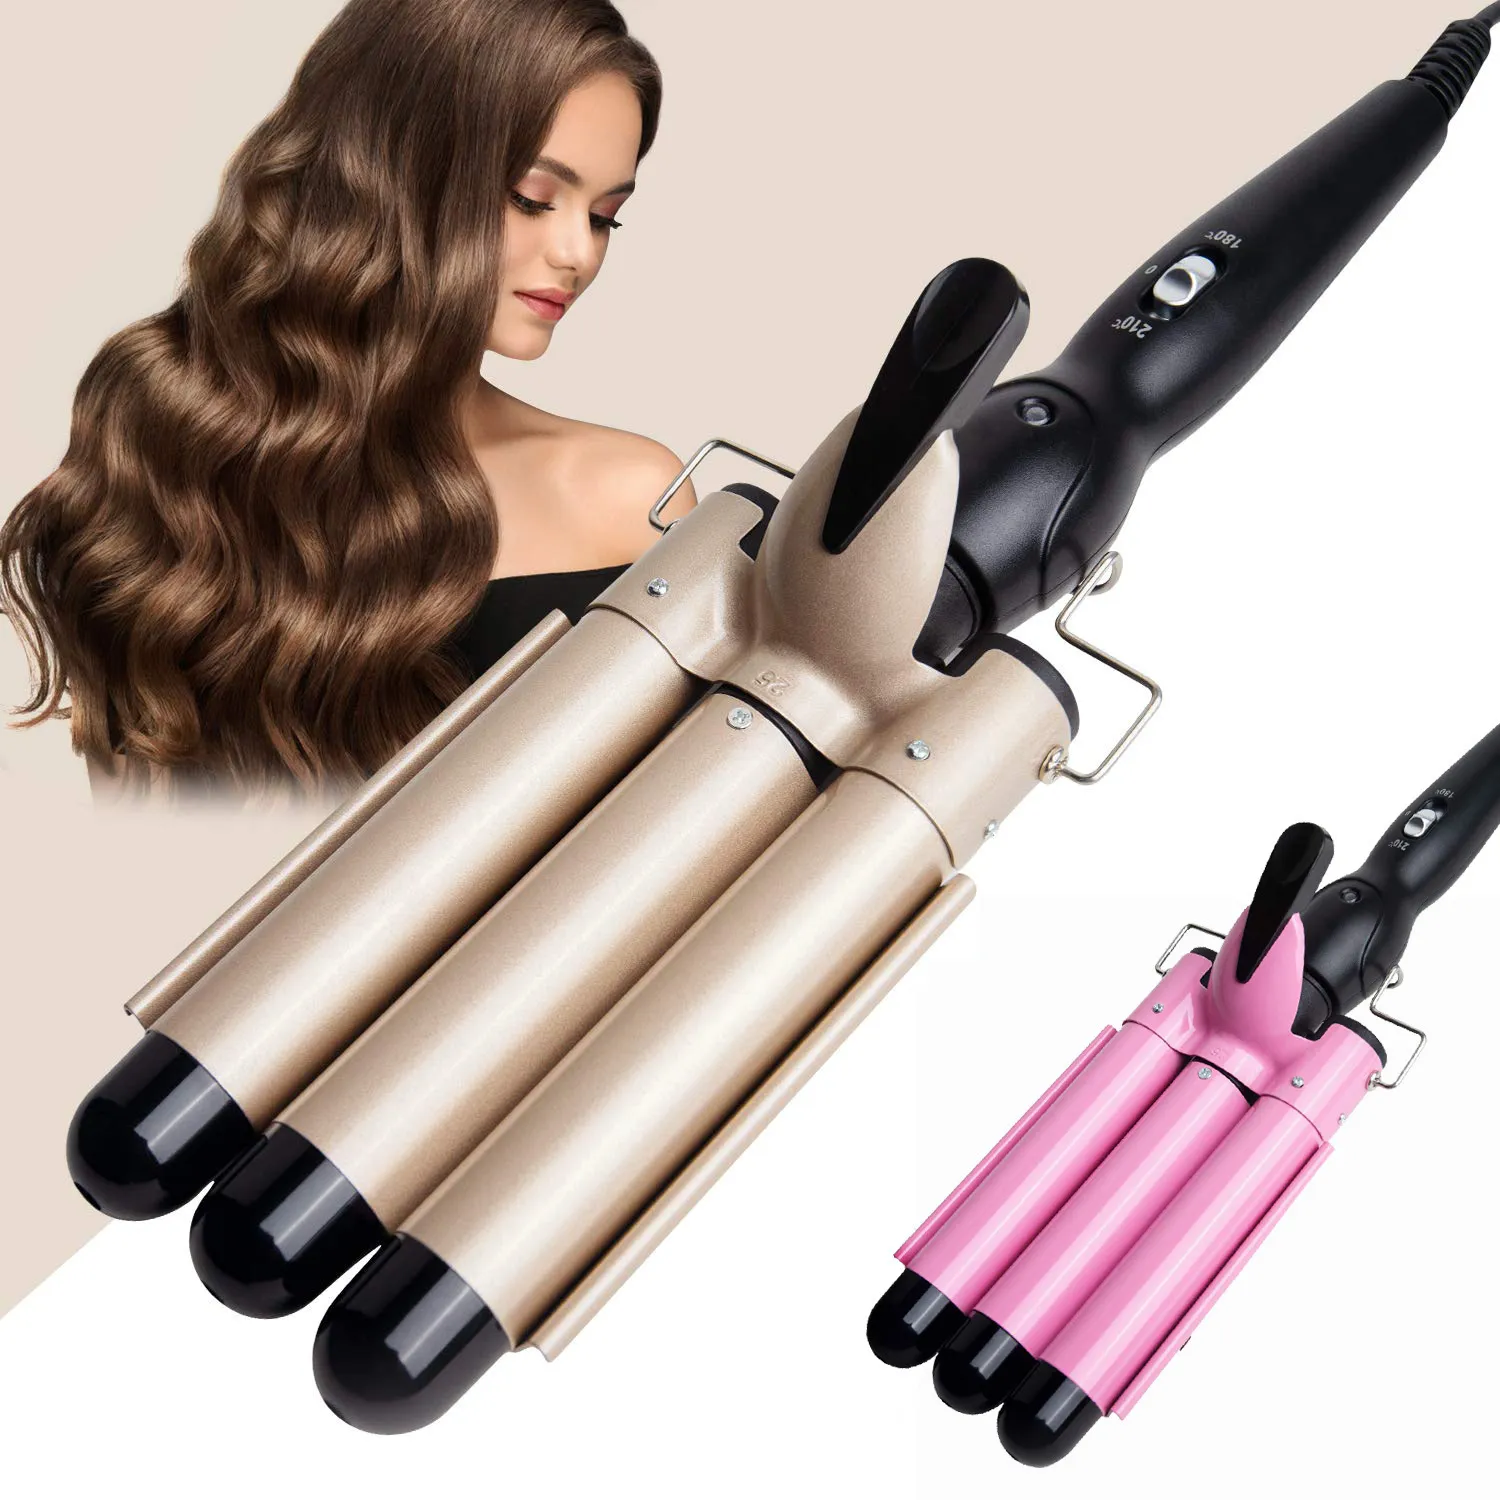 Care & Productsprofessional Curling Iron Ceramic Triple Barrel Curler Irons Hair Wave Waver Styling Tools Hairs Styler Wand Drop Delivery